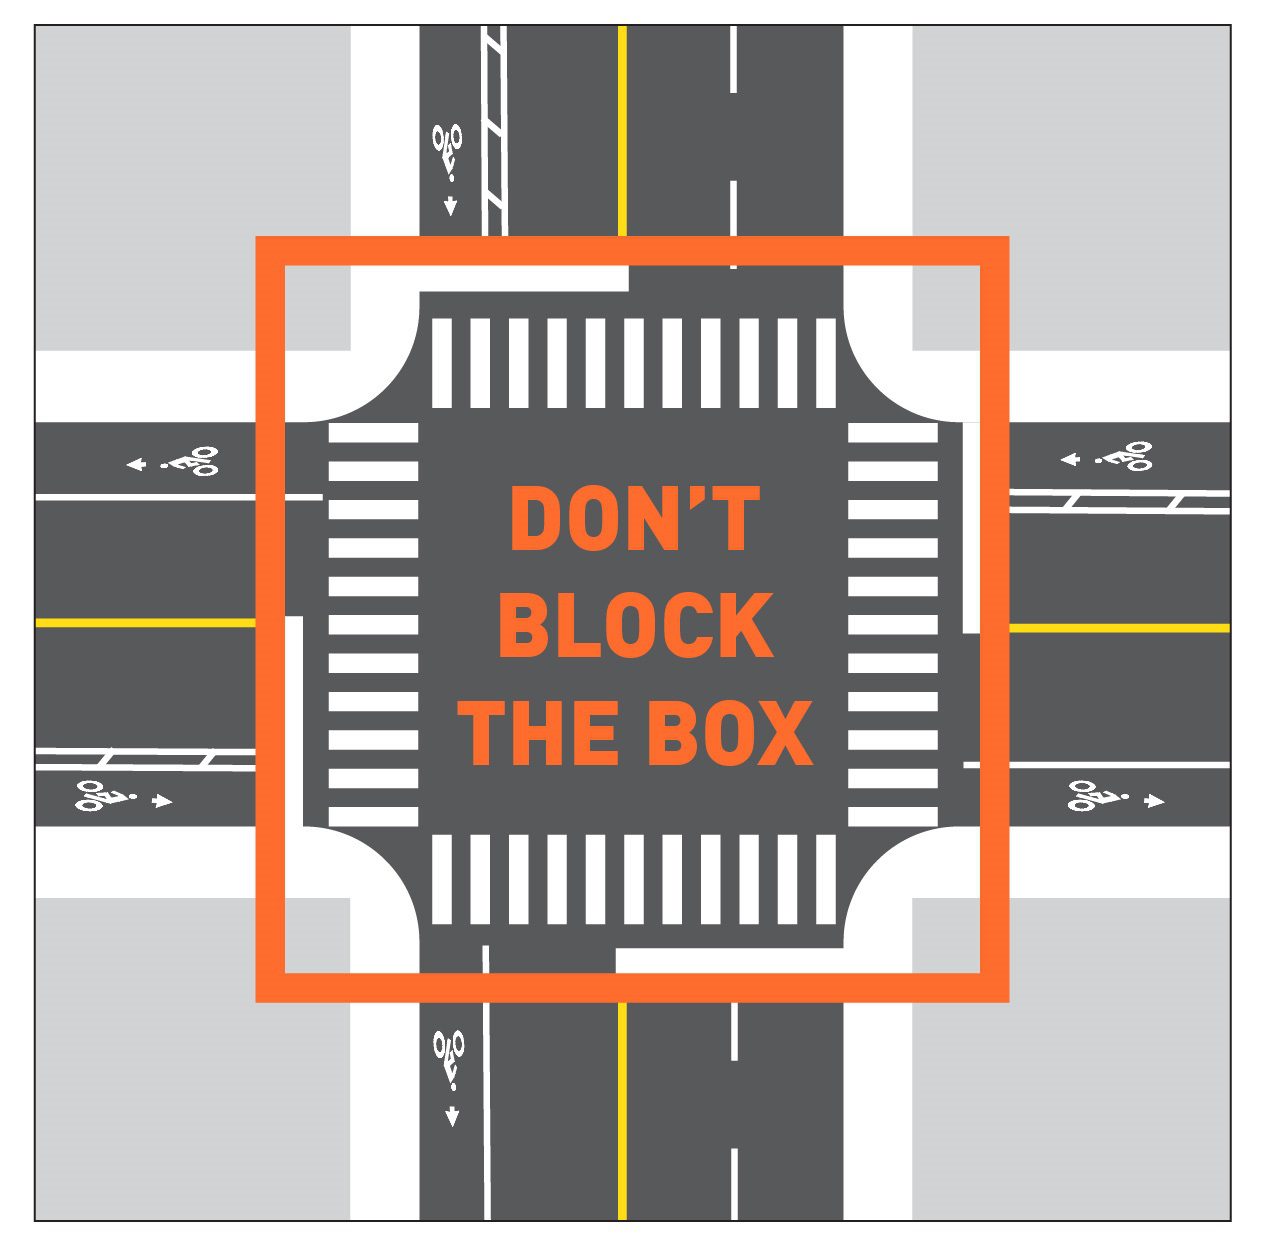 A graphic encouraging drivers to not 